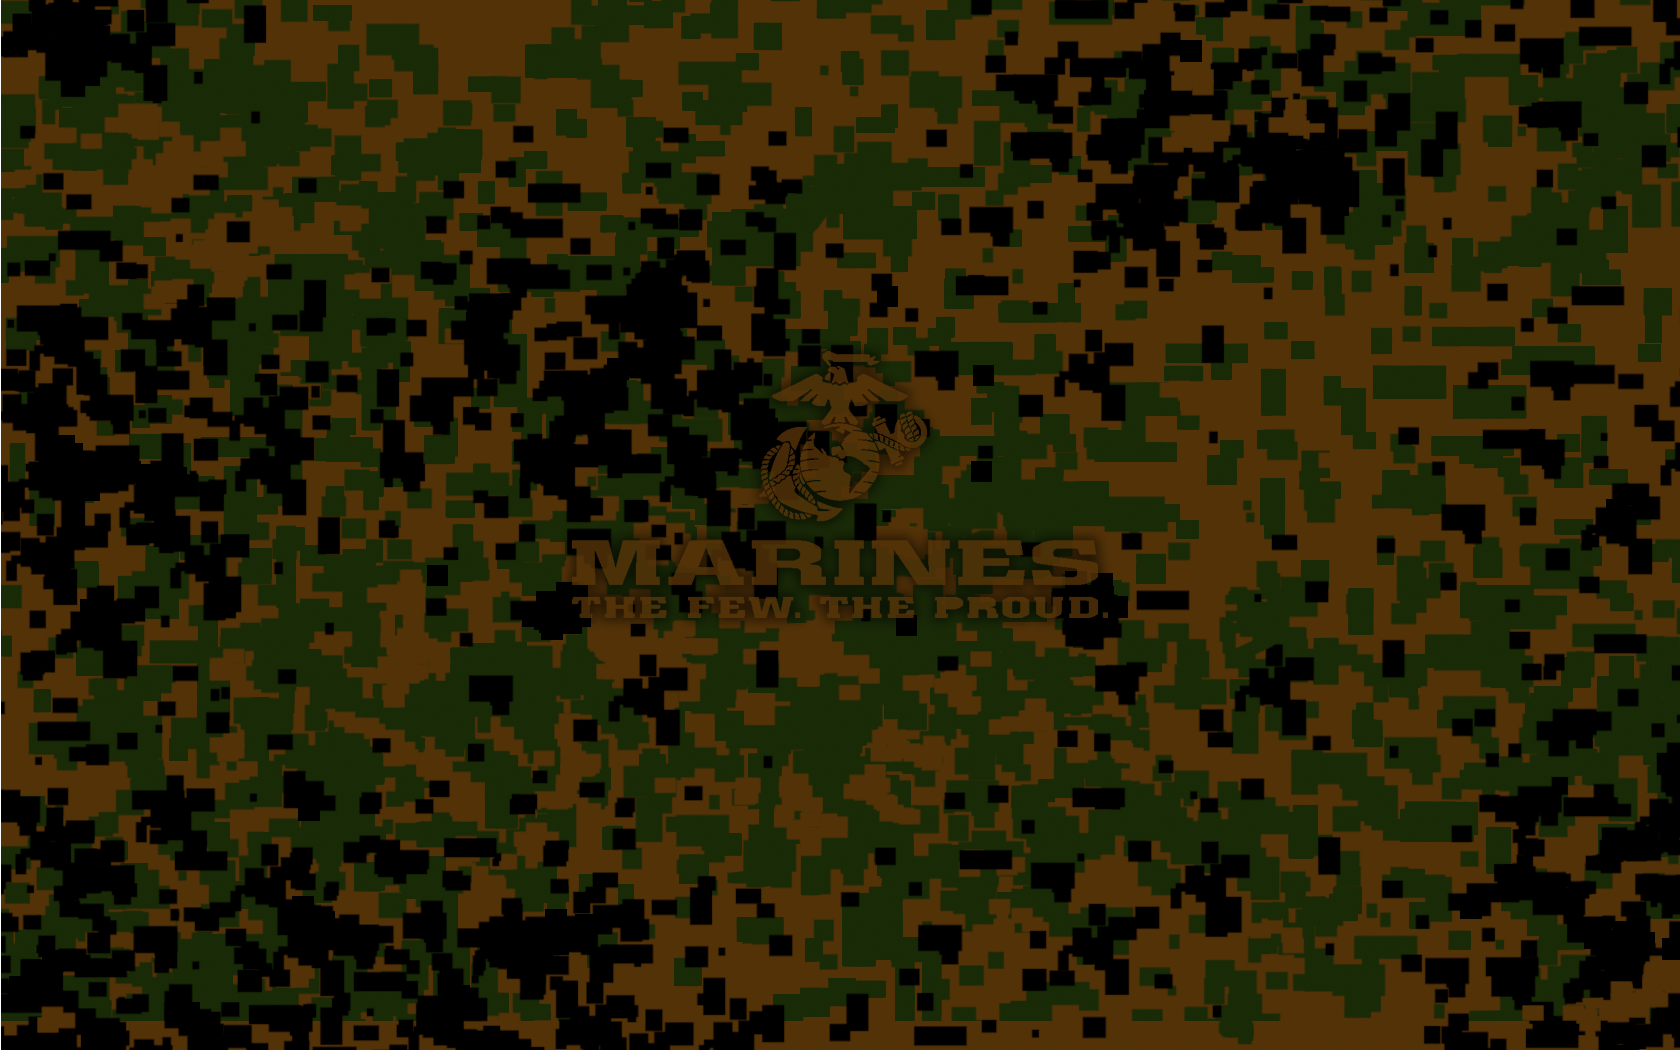 camo download army gallery wallpaper full hd wallpapers wallpaper army